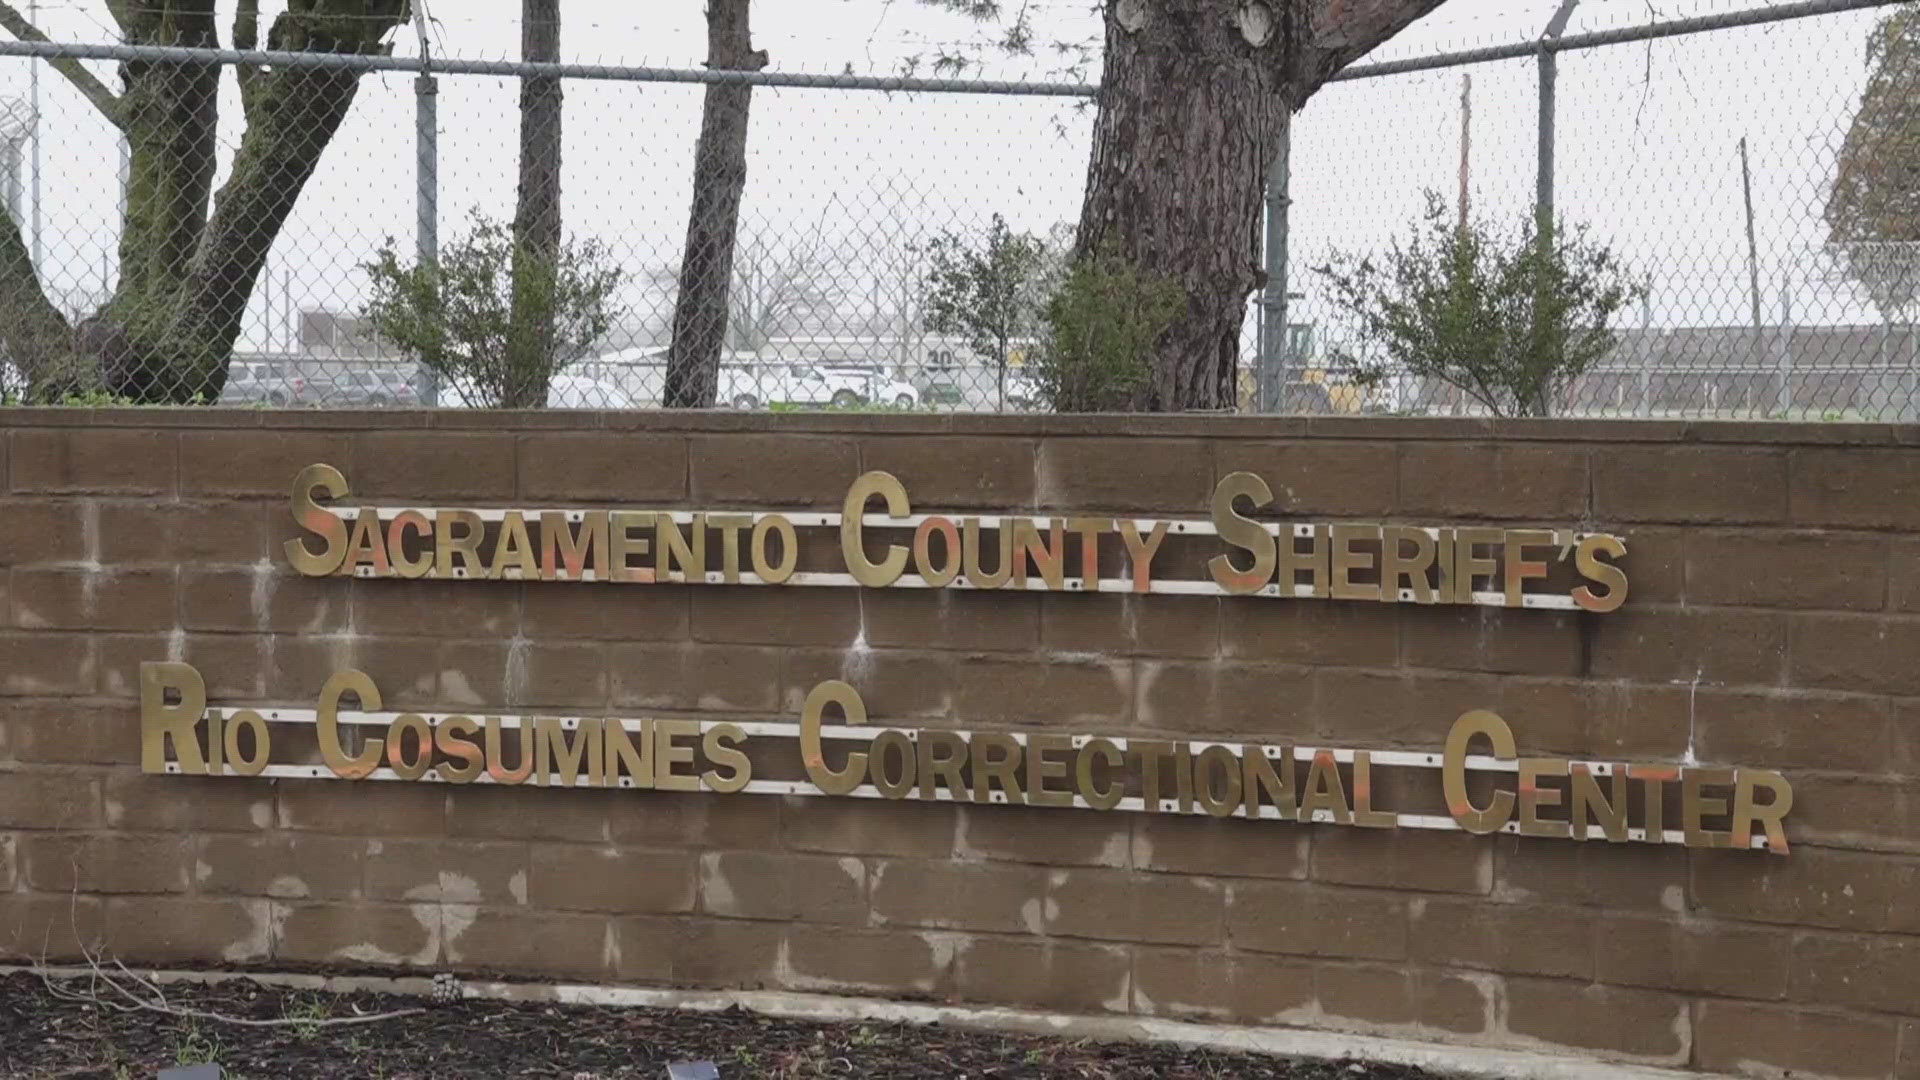 The 41-year-old man died at the Rio Cosumnes Correctional Center Friday, officials said.